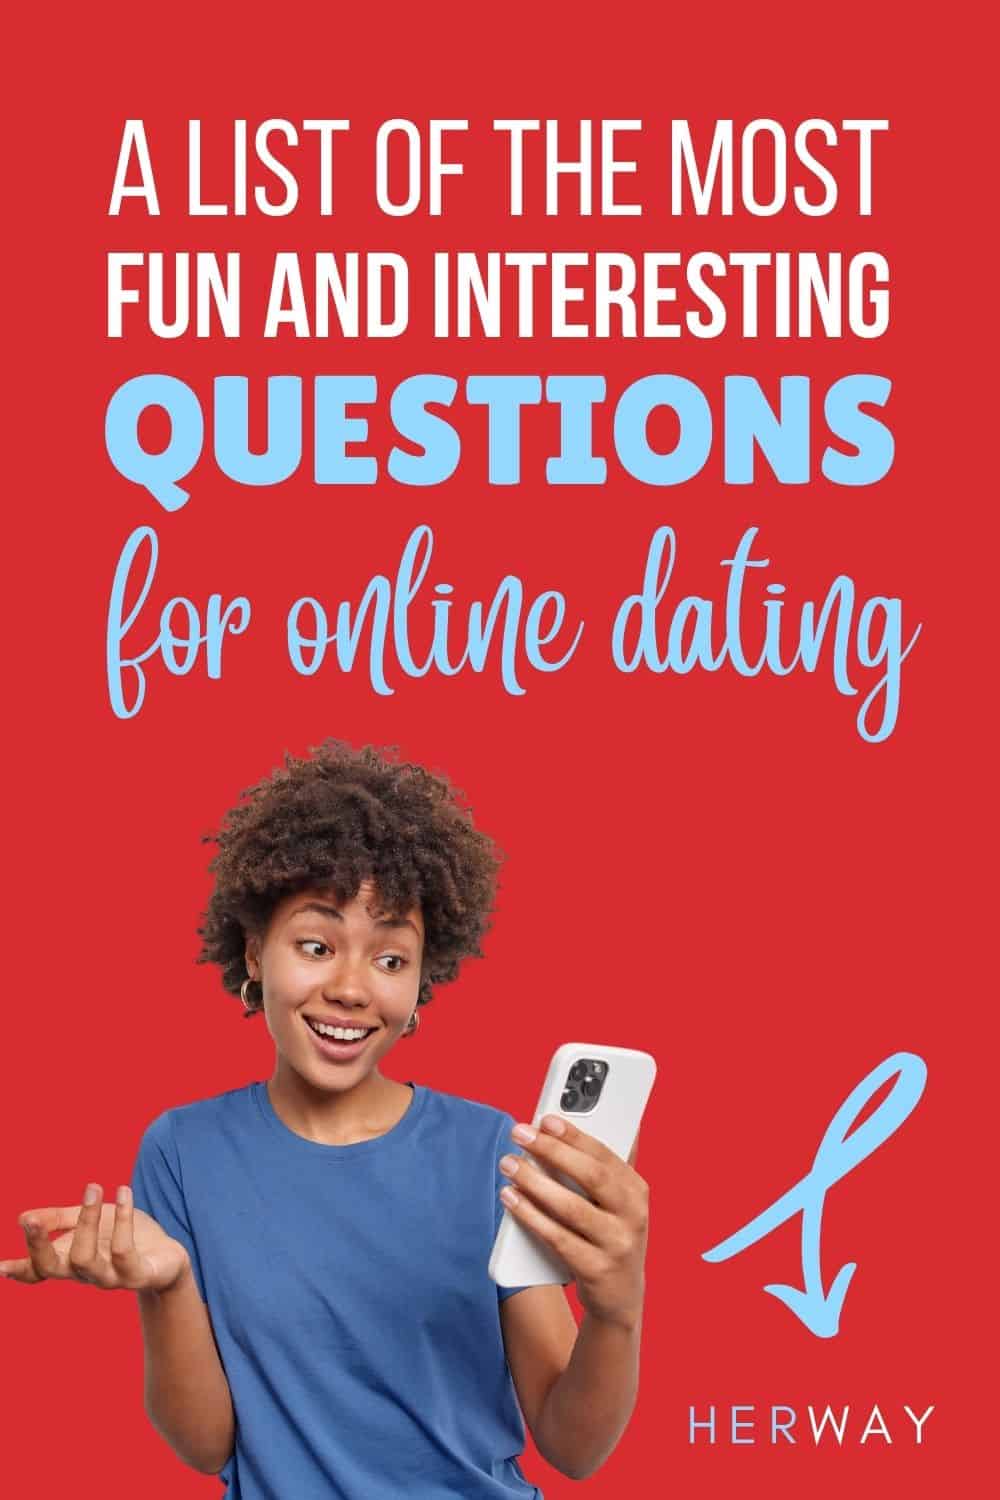 100 Online Dating Questions That Will Spark Great Conversations Pinterest